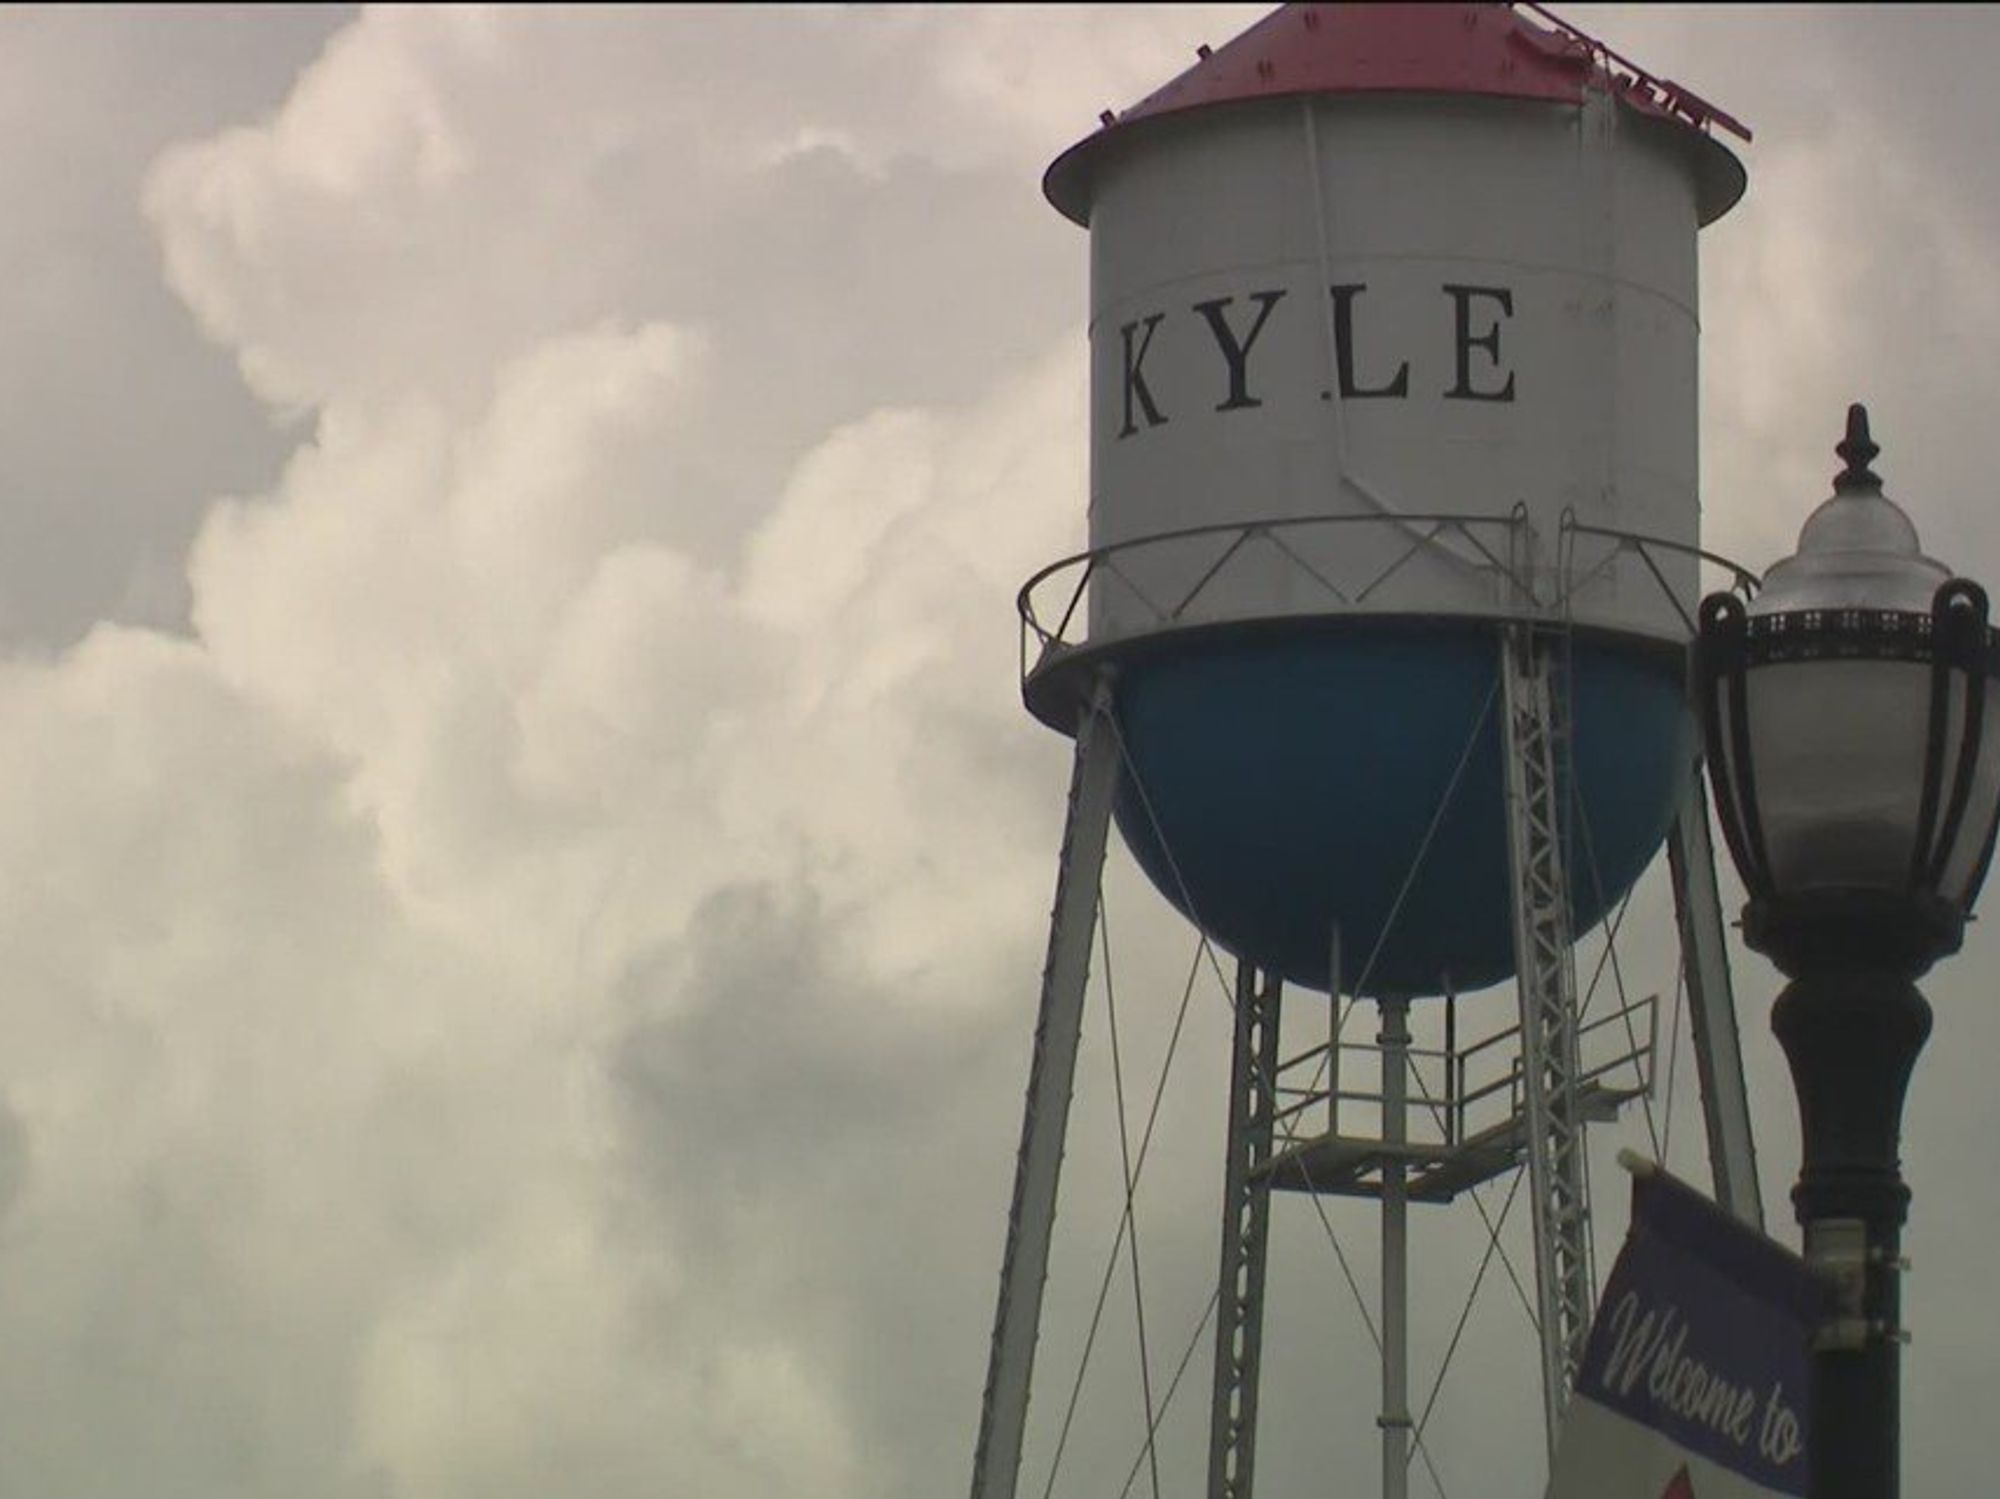 Kyle, Texas, water tower